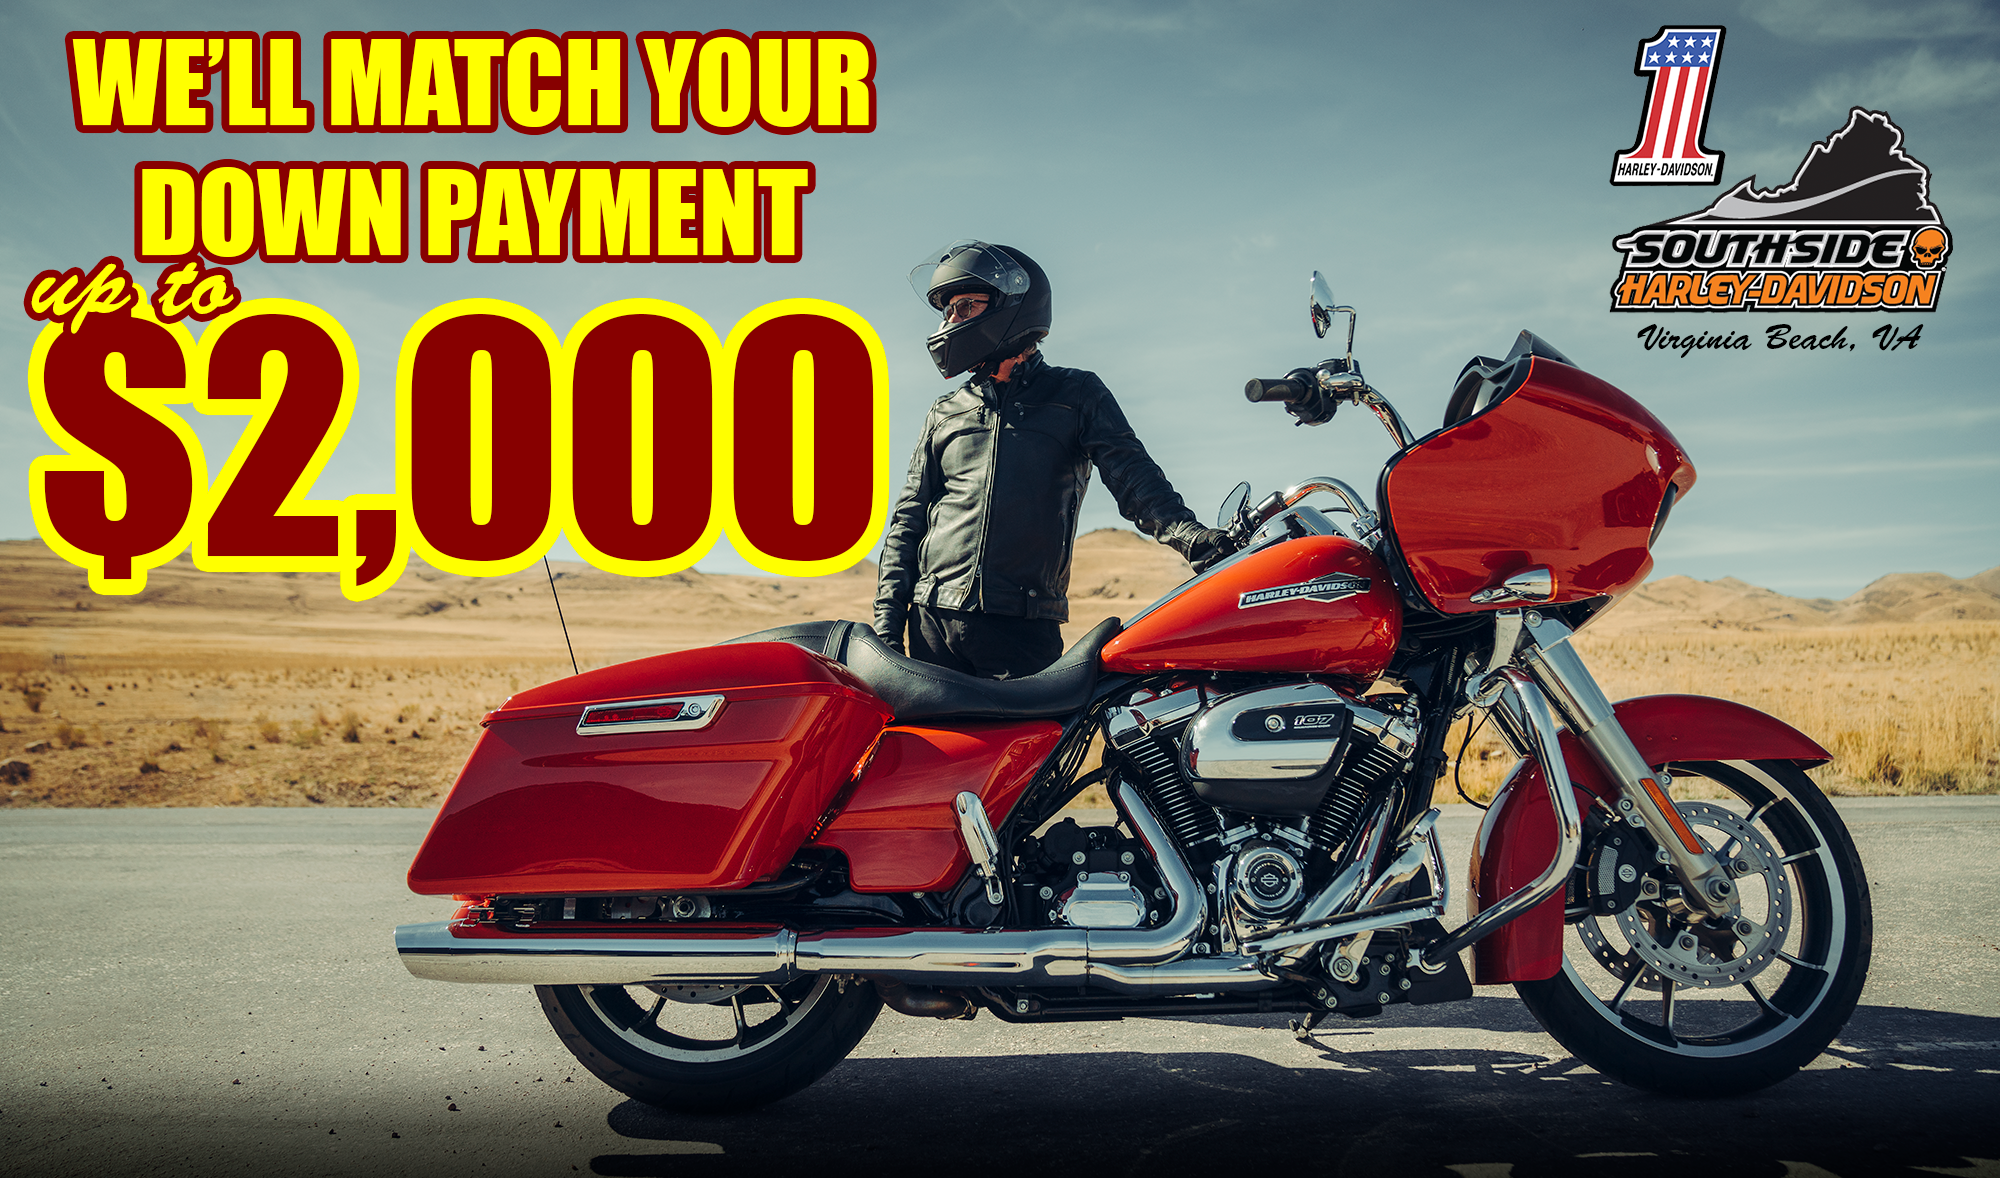 Buy any Pre-Owned Harley and Southside H-D will match the value of your down payment up to $2,000.  See dealer for complete details.